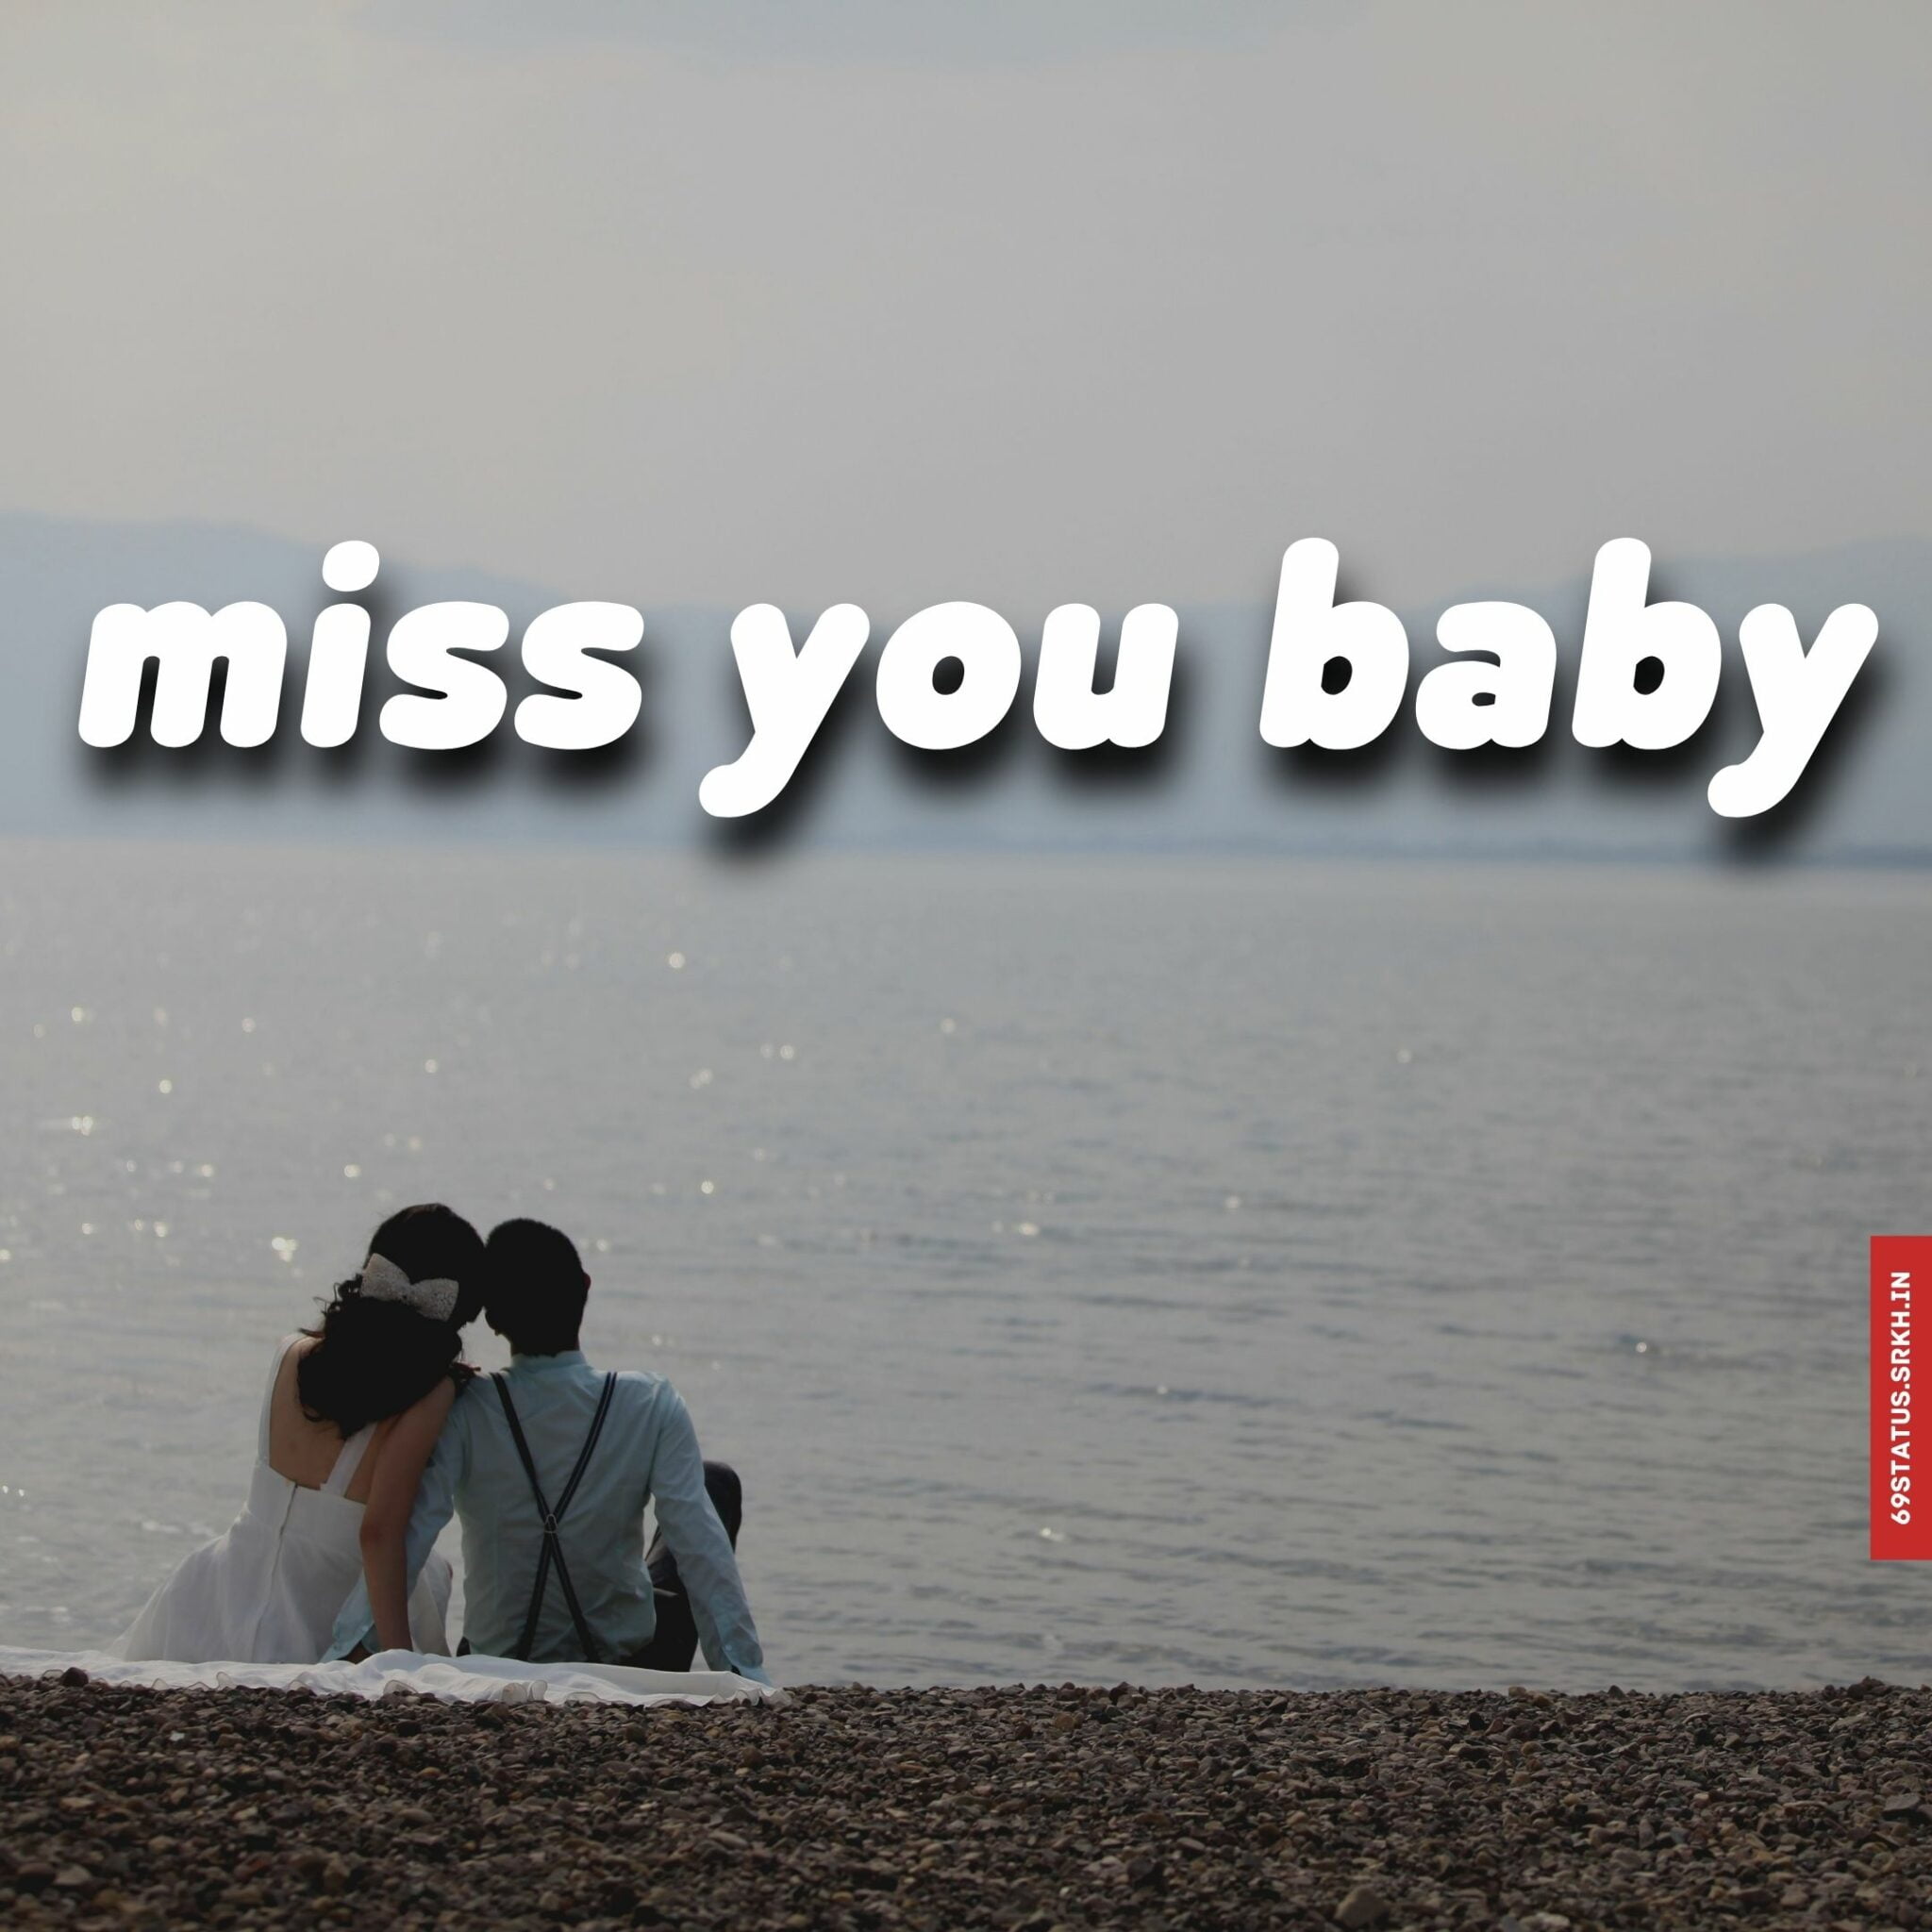 🔥 Miss you baby images Download free - Images SRkh